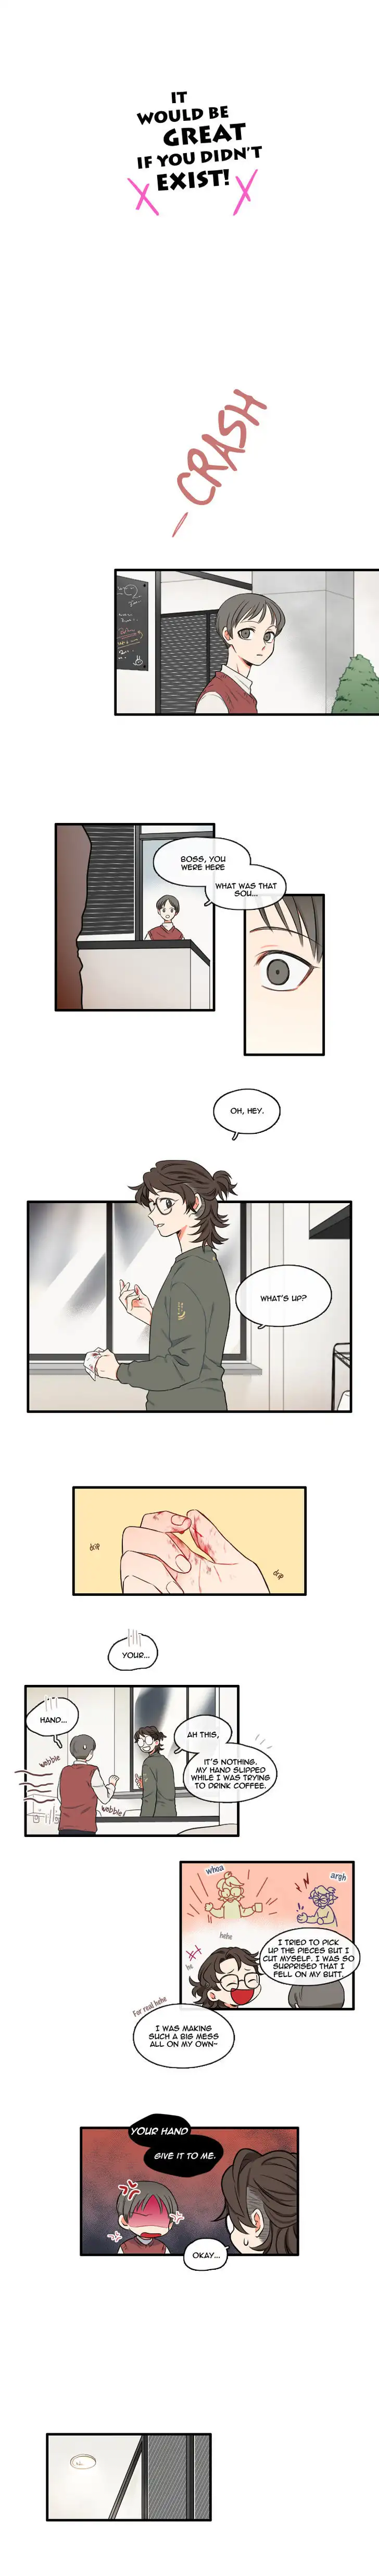 It Would Be Great if You Didn’t Exist - Chapter 21 Page 2